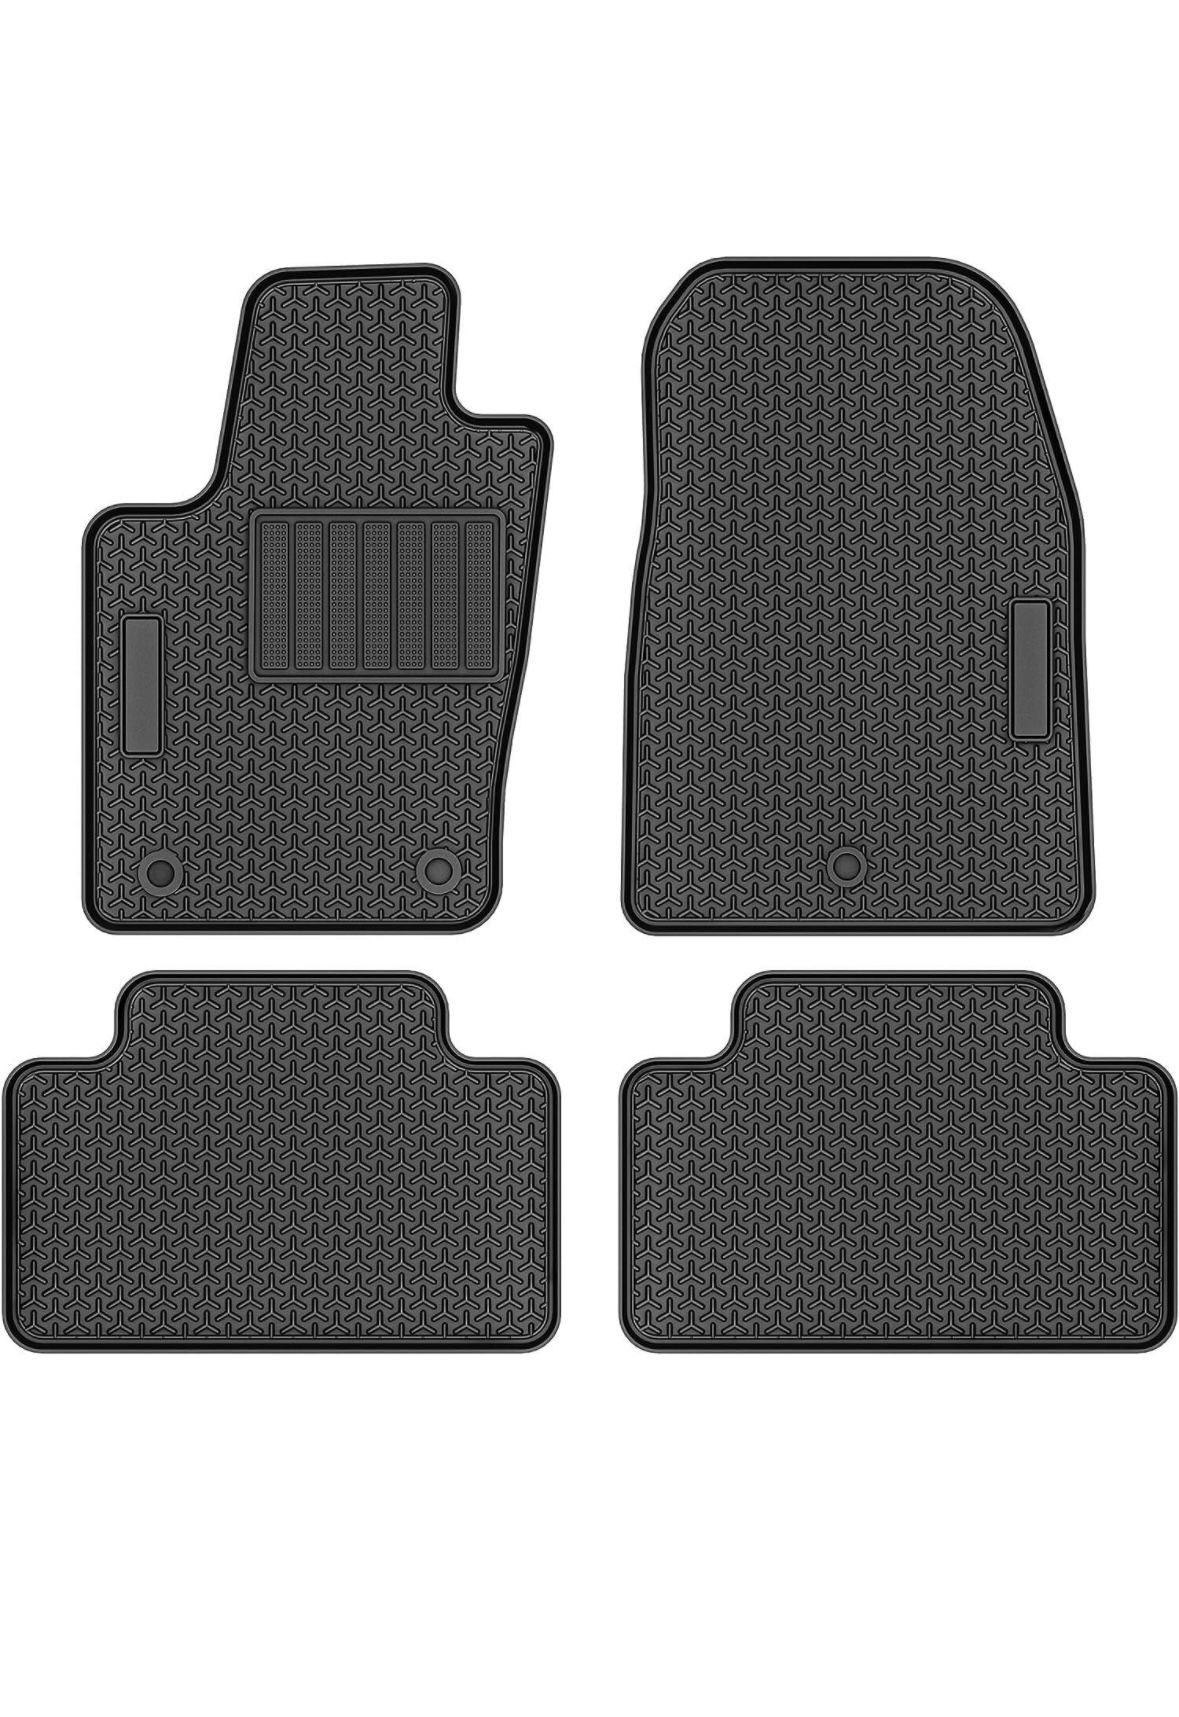 2D Floor Mats for 2016-2021 Jeep Grand Cherokee All Weather 1st 2nd Row Liners